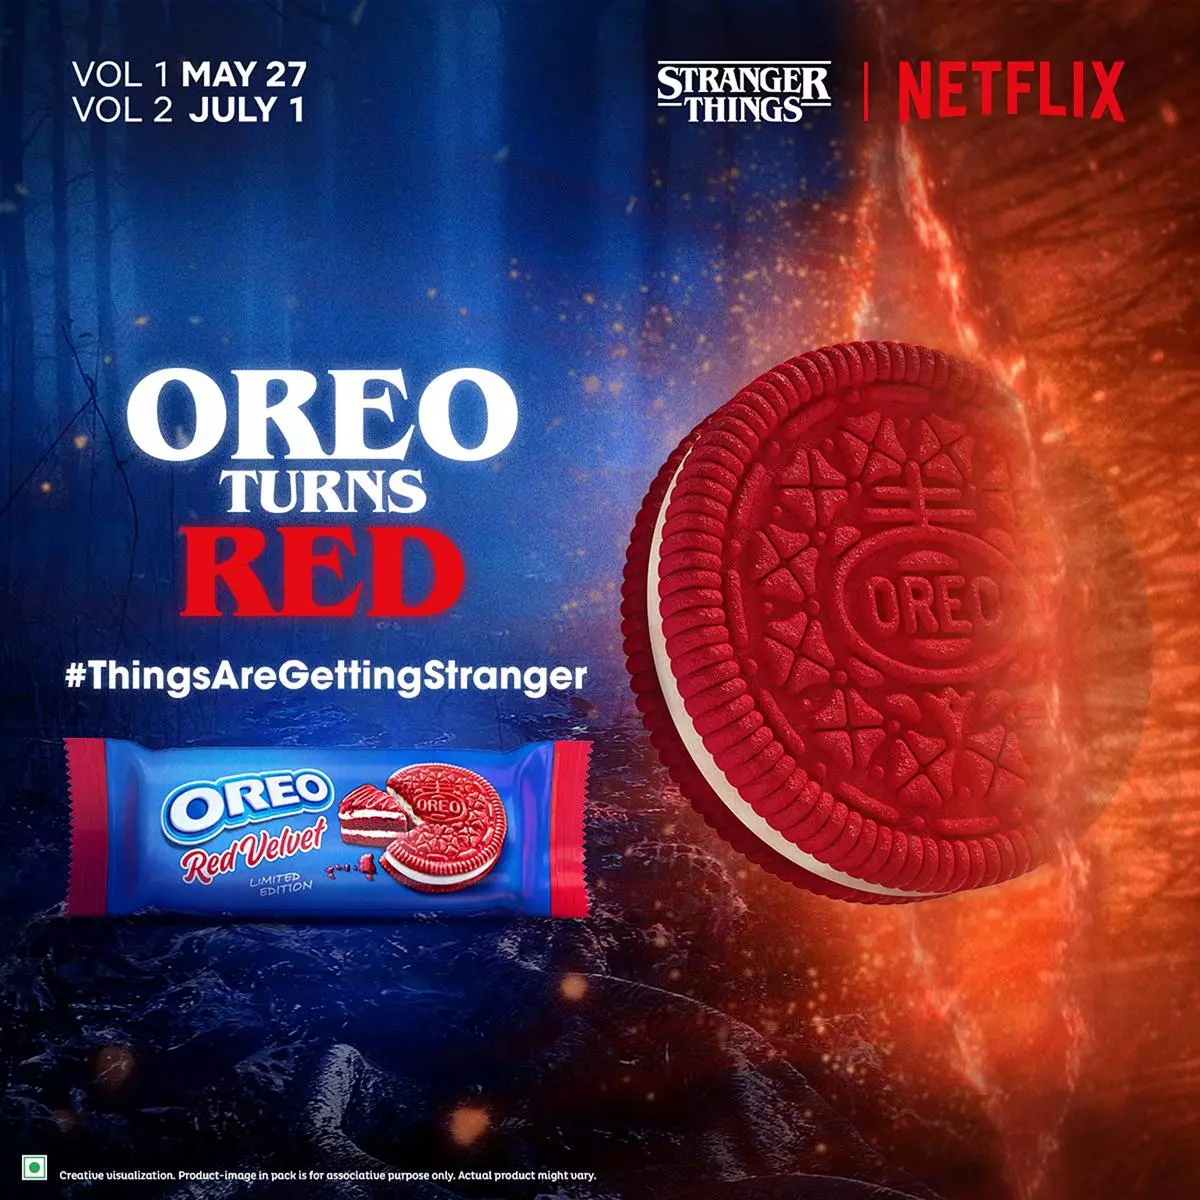 Like Oreo’s collab with Netflix, brands are merging communities to get bigger and better